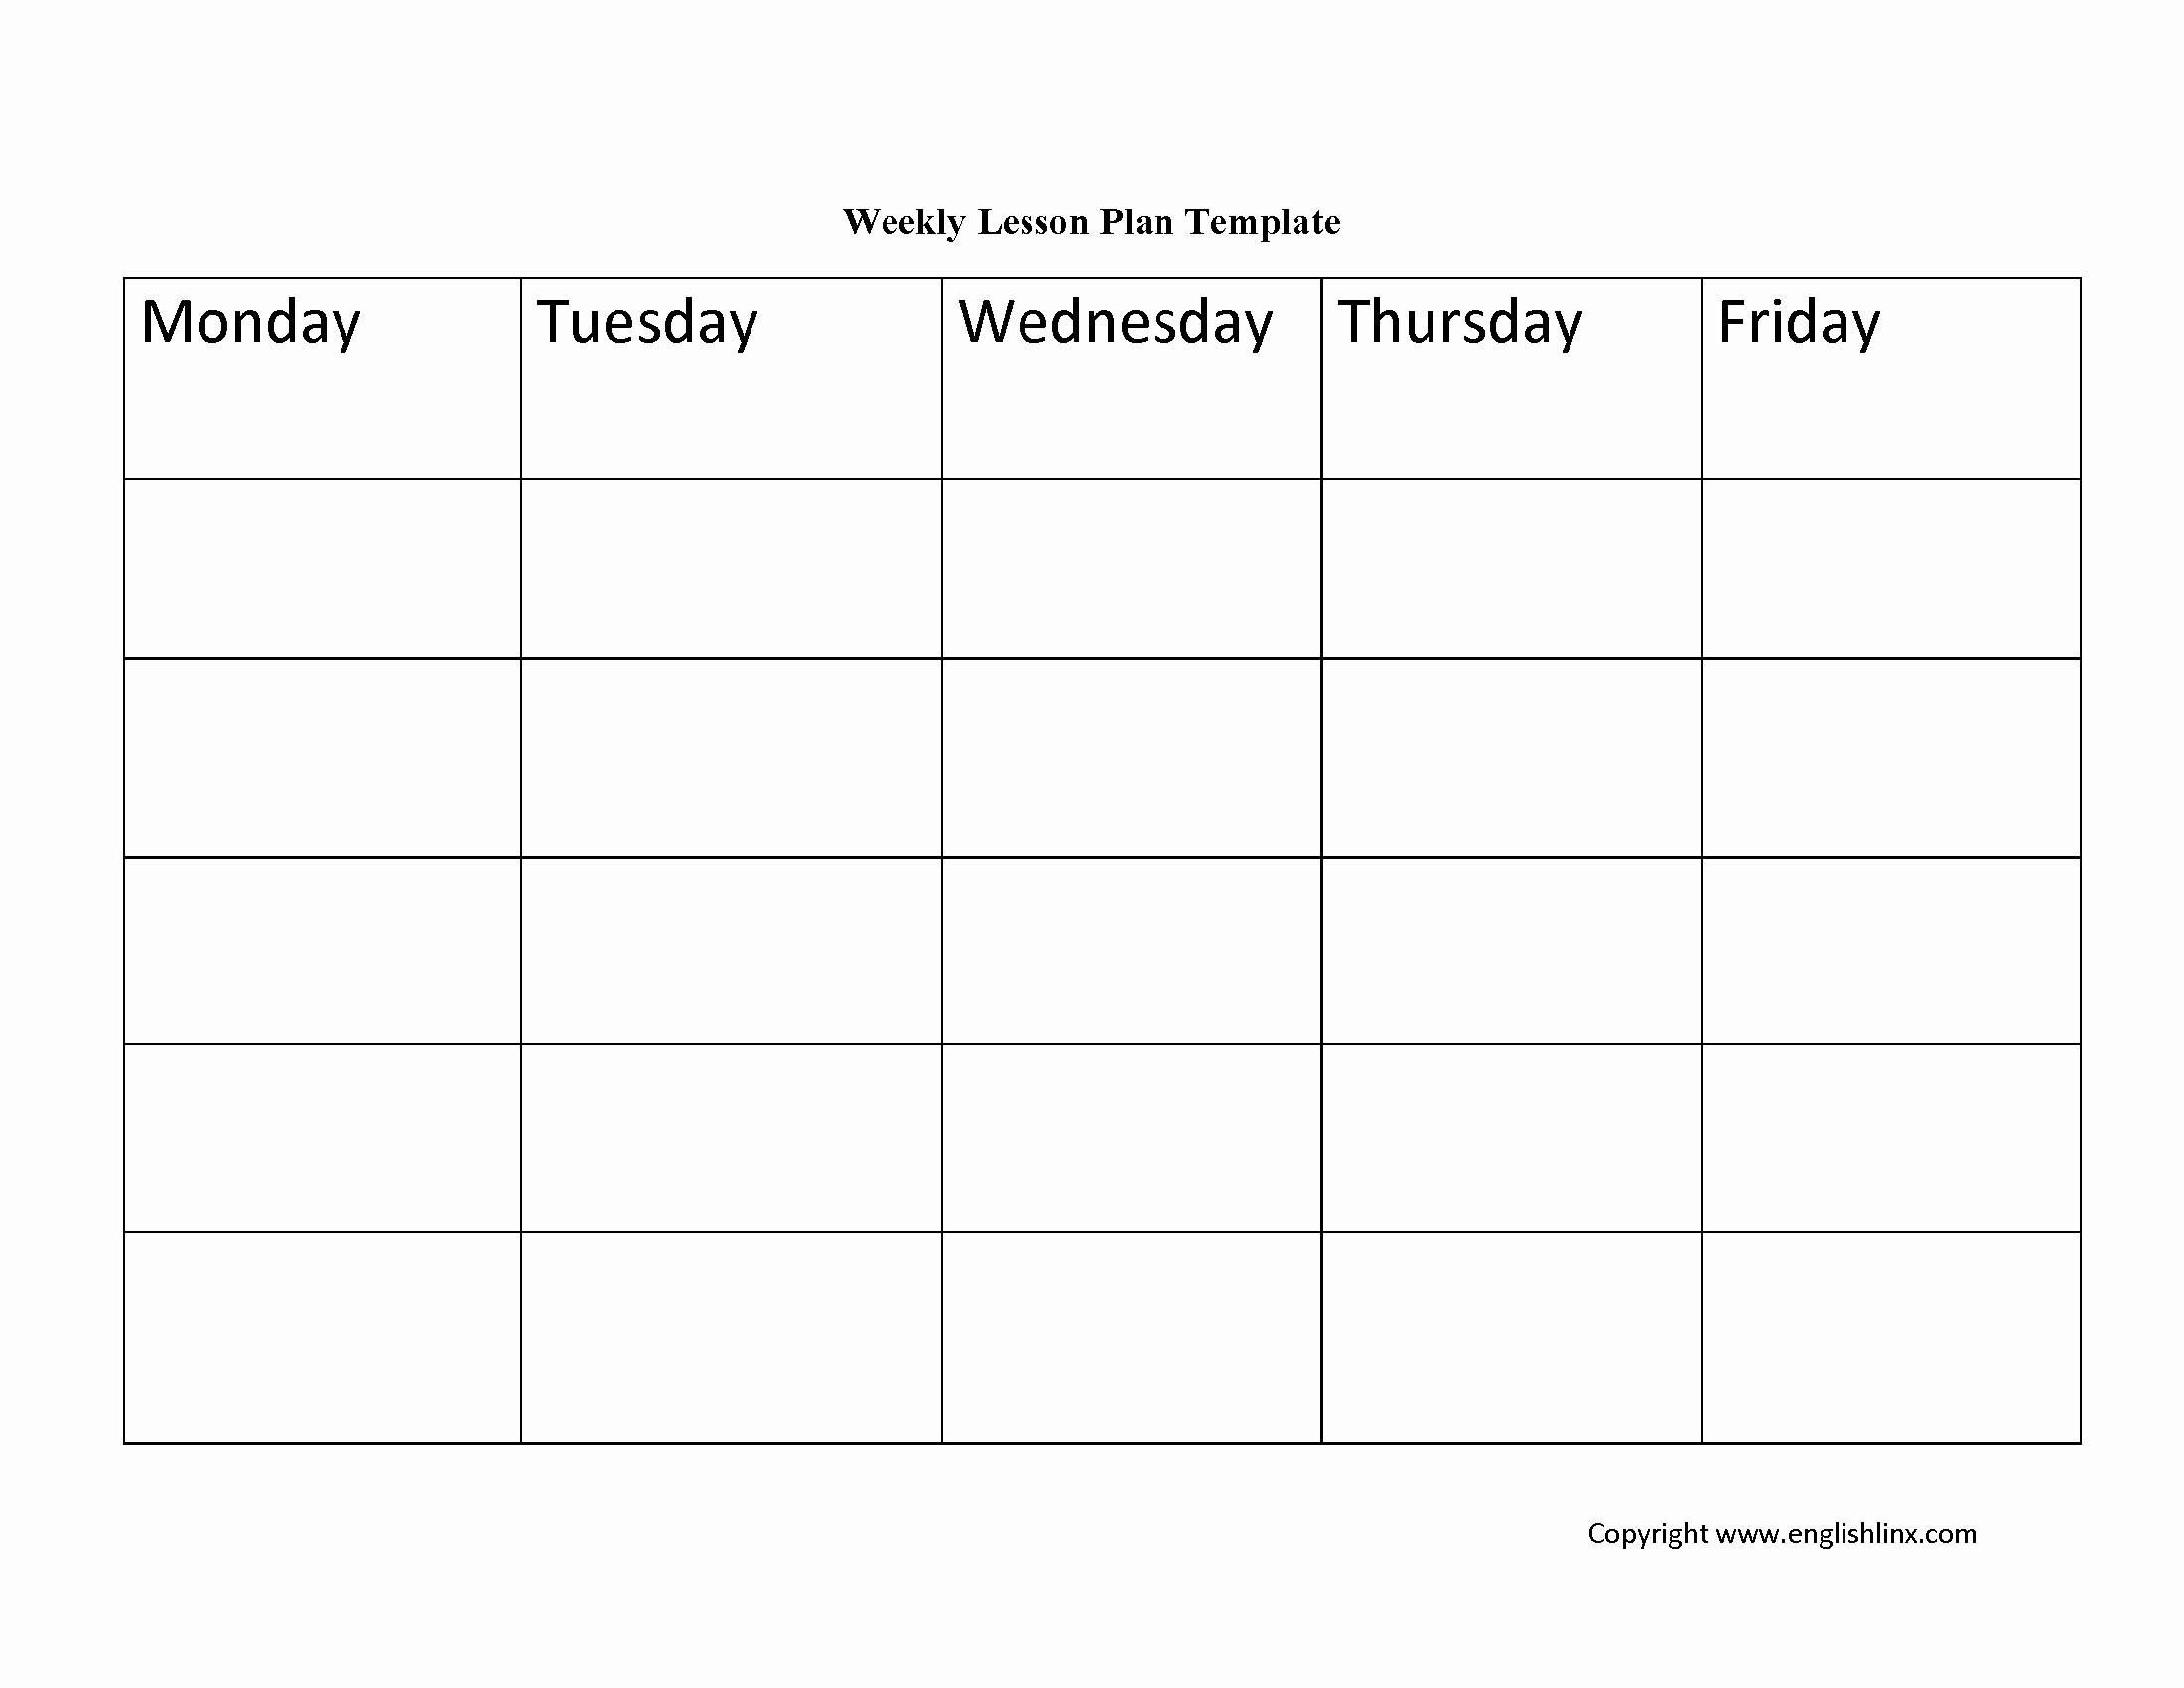 Weekly Lesson Plans Template Lovely Lesson Plan Template